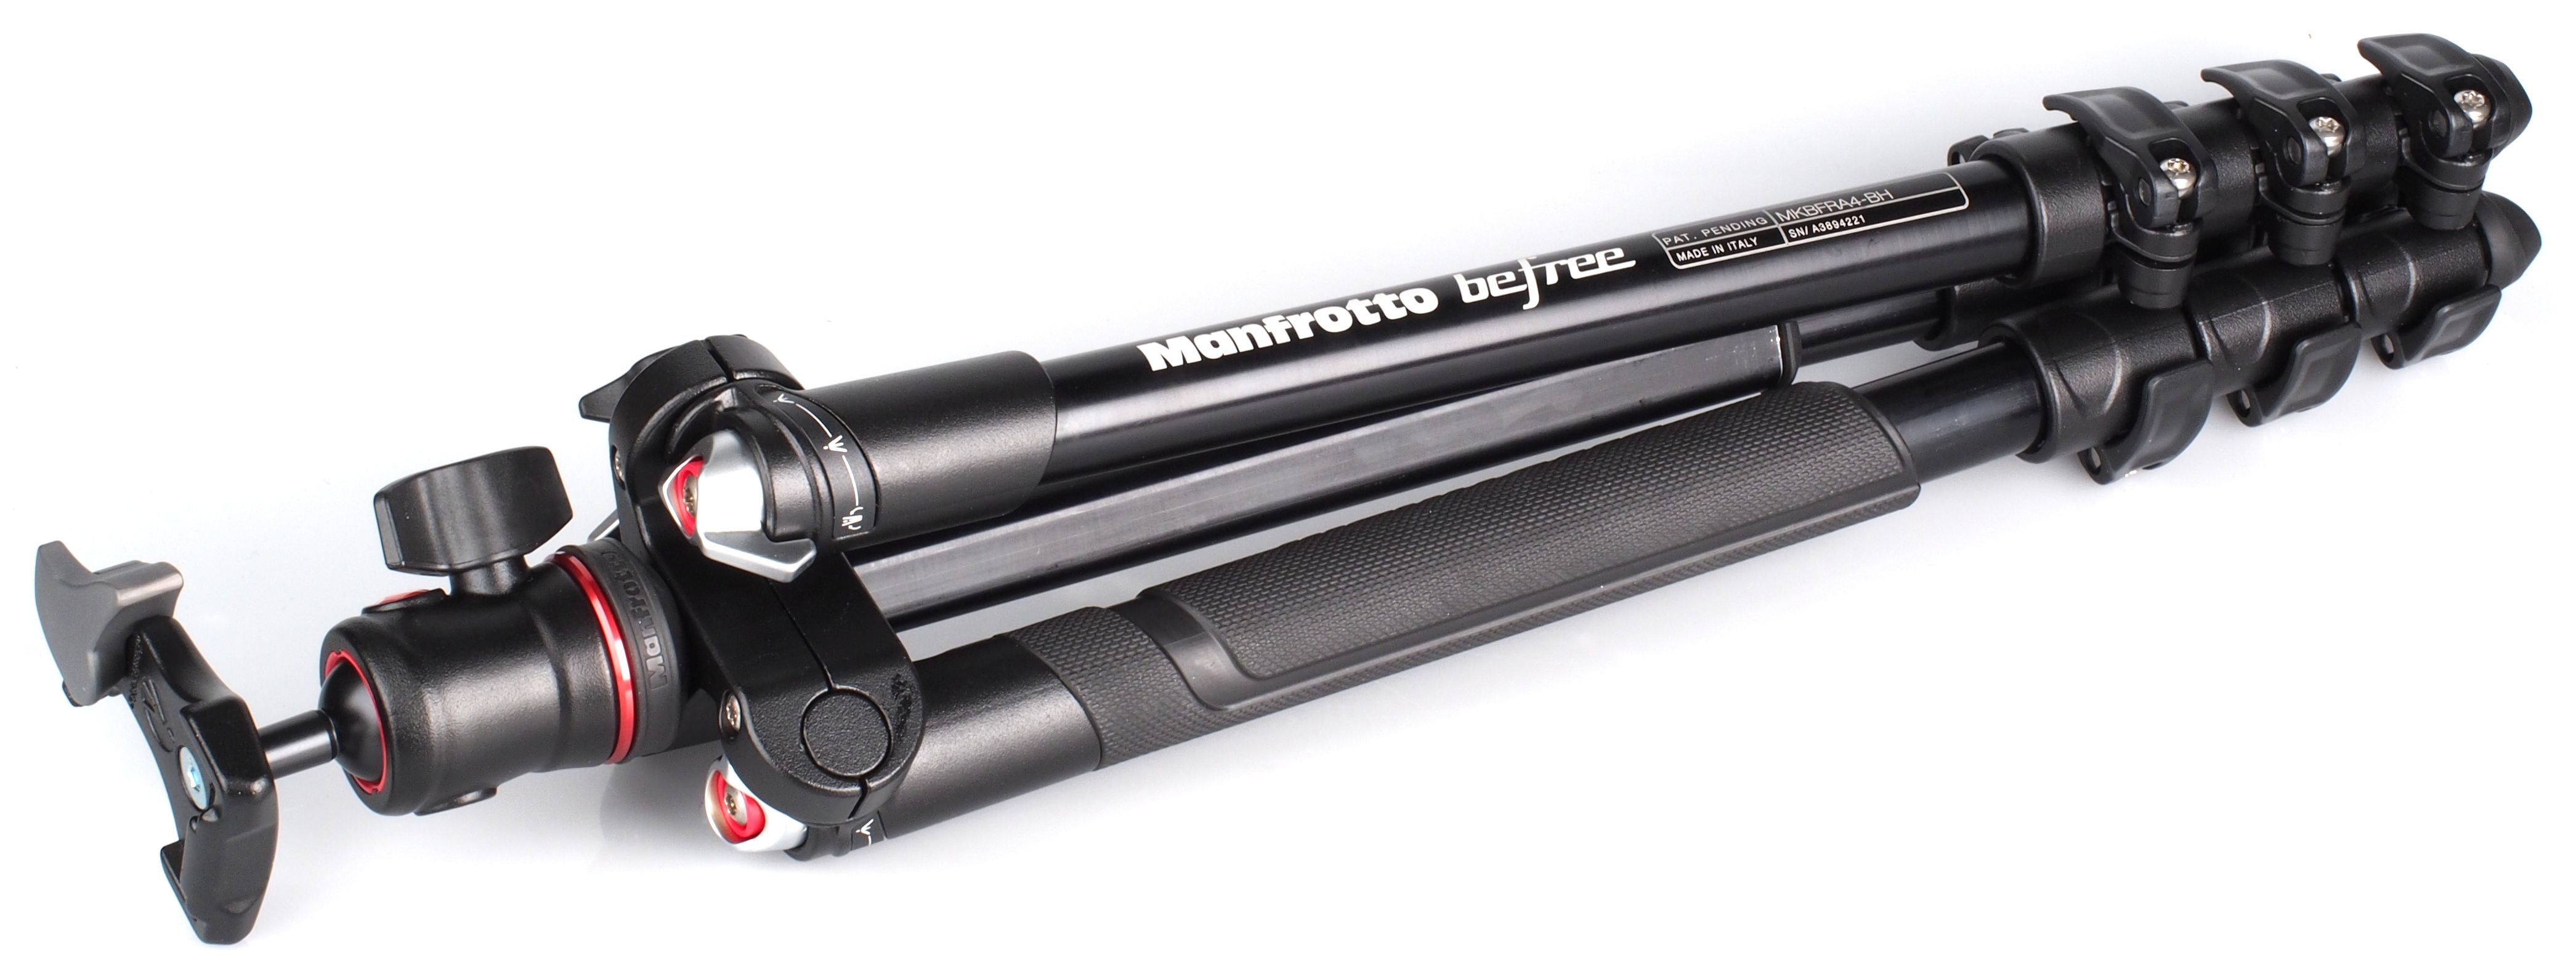 Highres Manfrotto Befree Tripod Mkbfr A4 Bh 5 1372345648